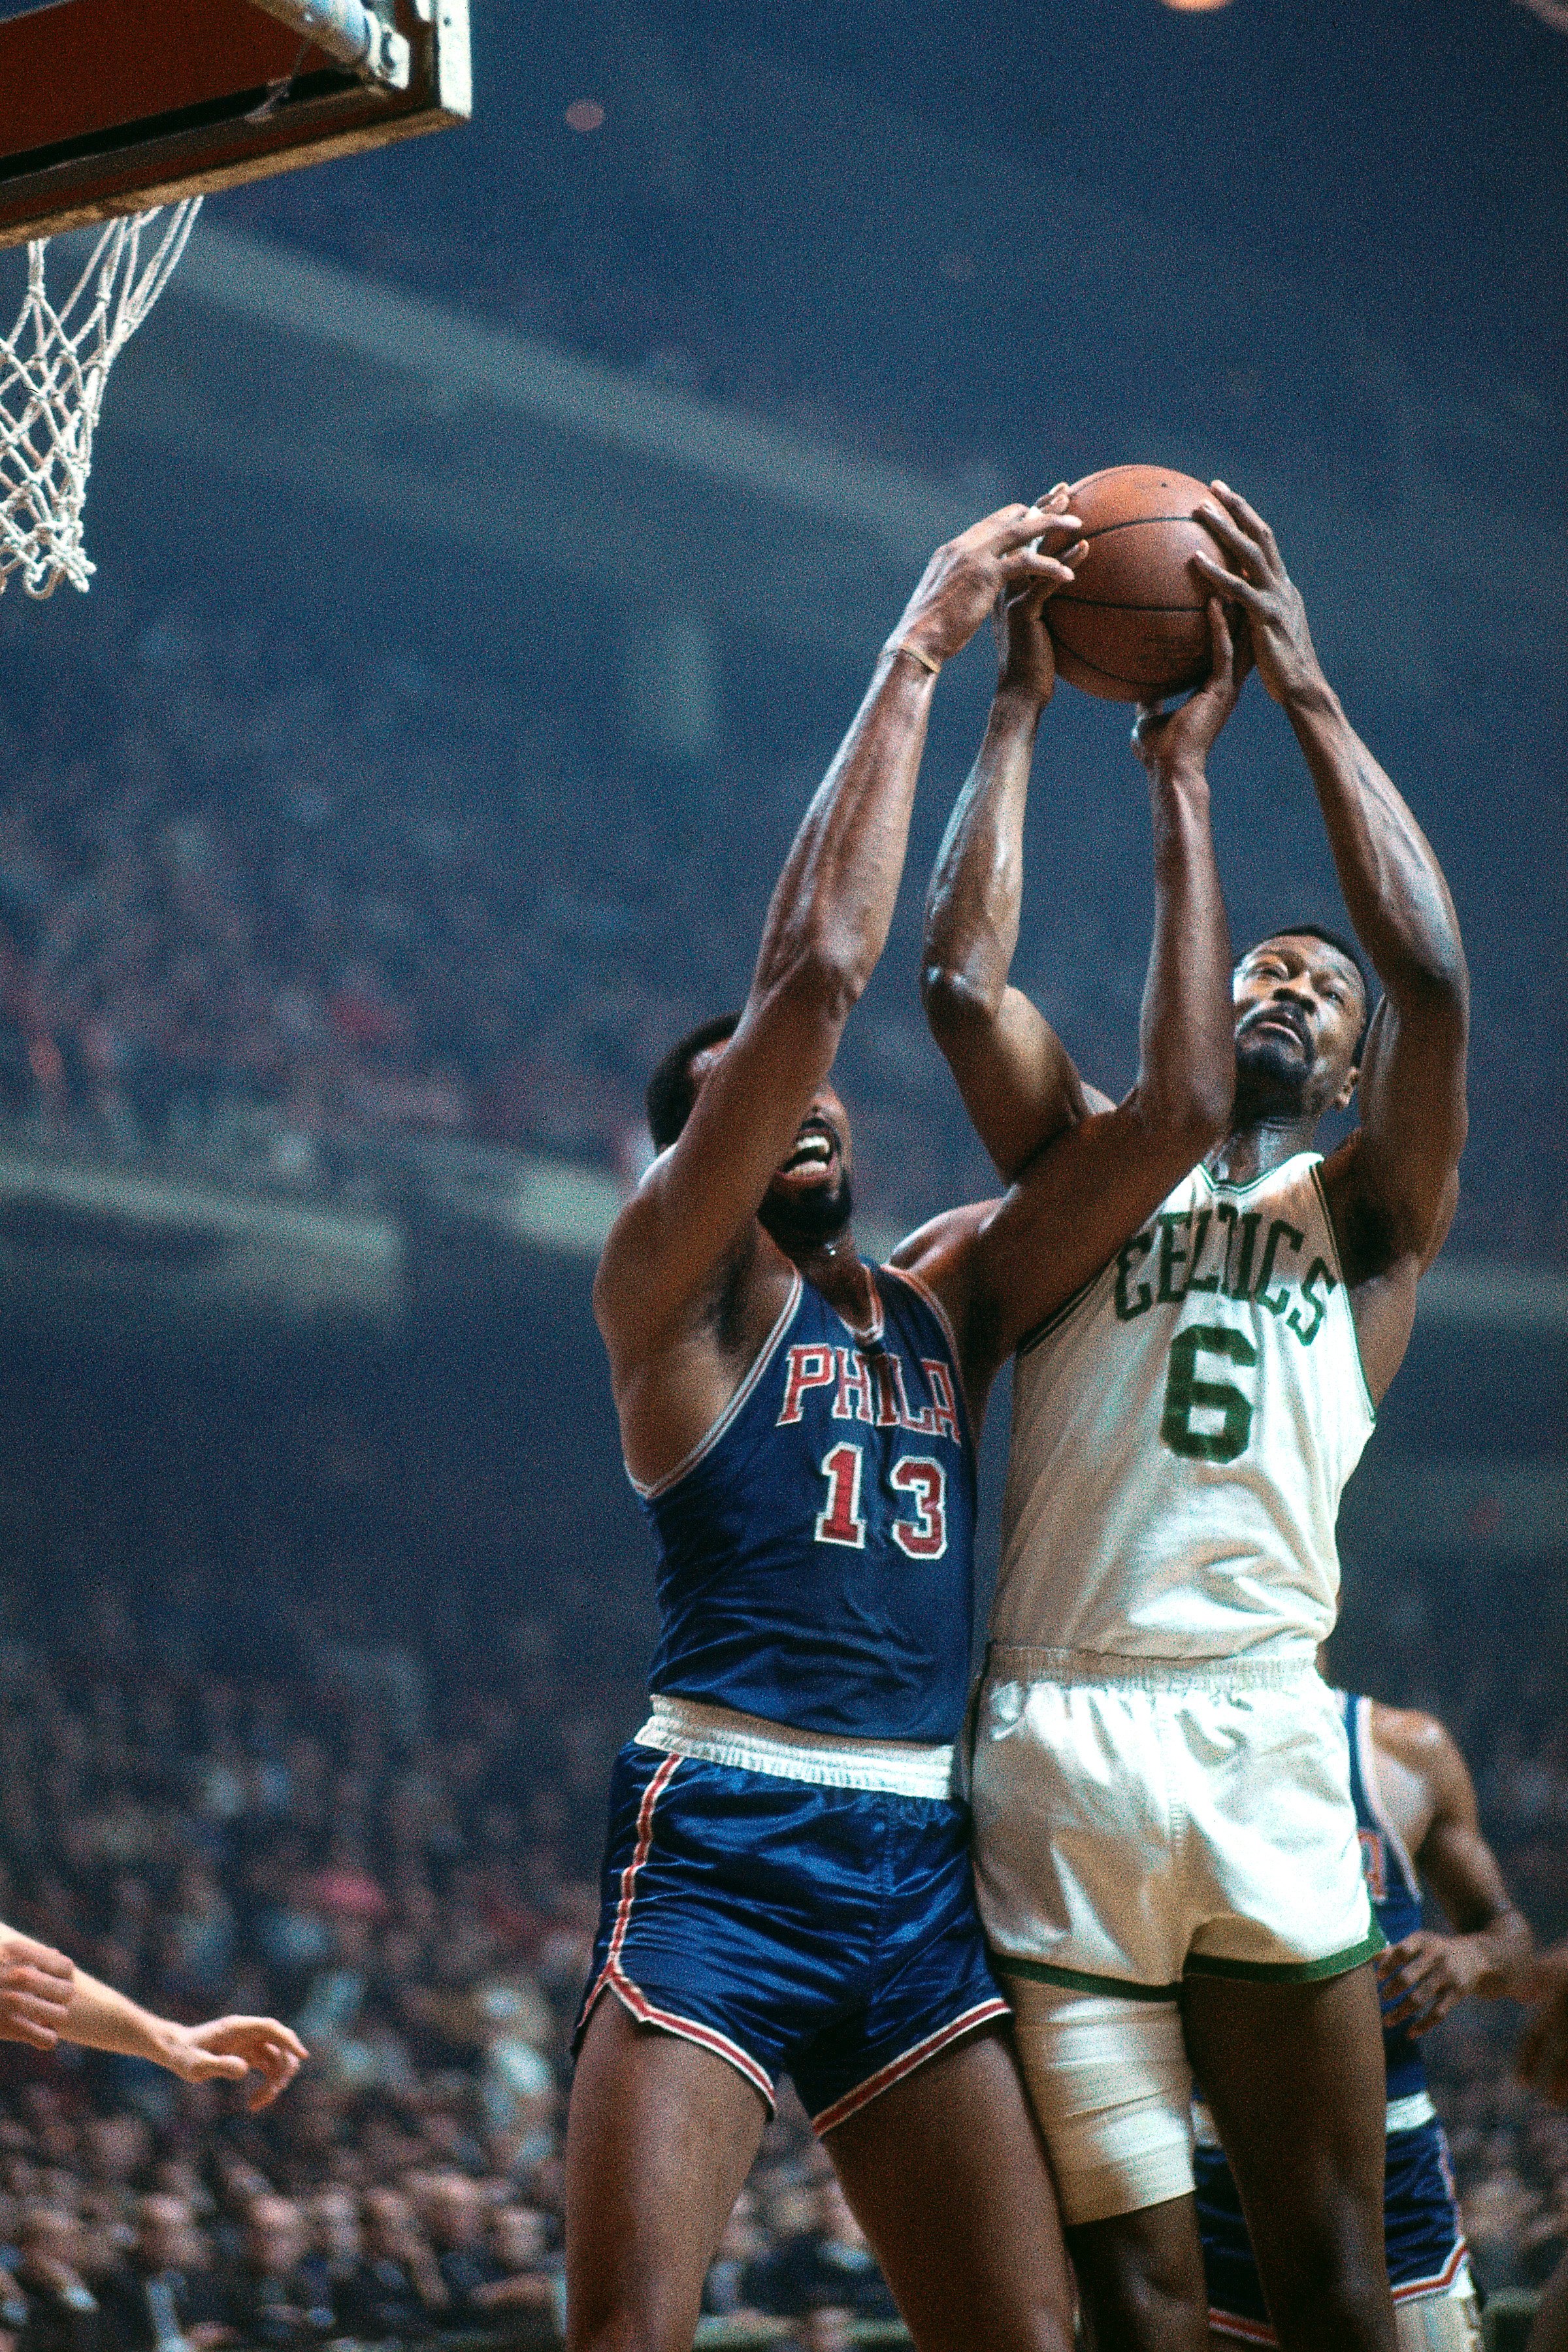 This is a photo of Wilt Chamberlain in his 1967 season with Philadelphia.